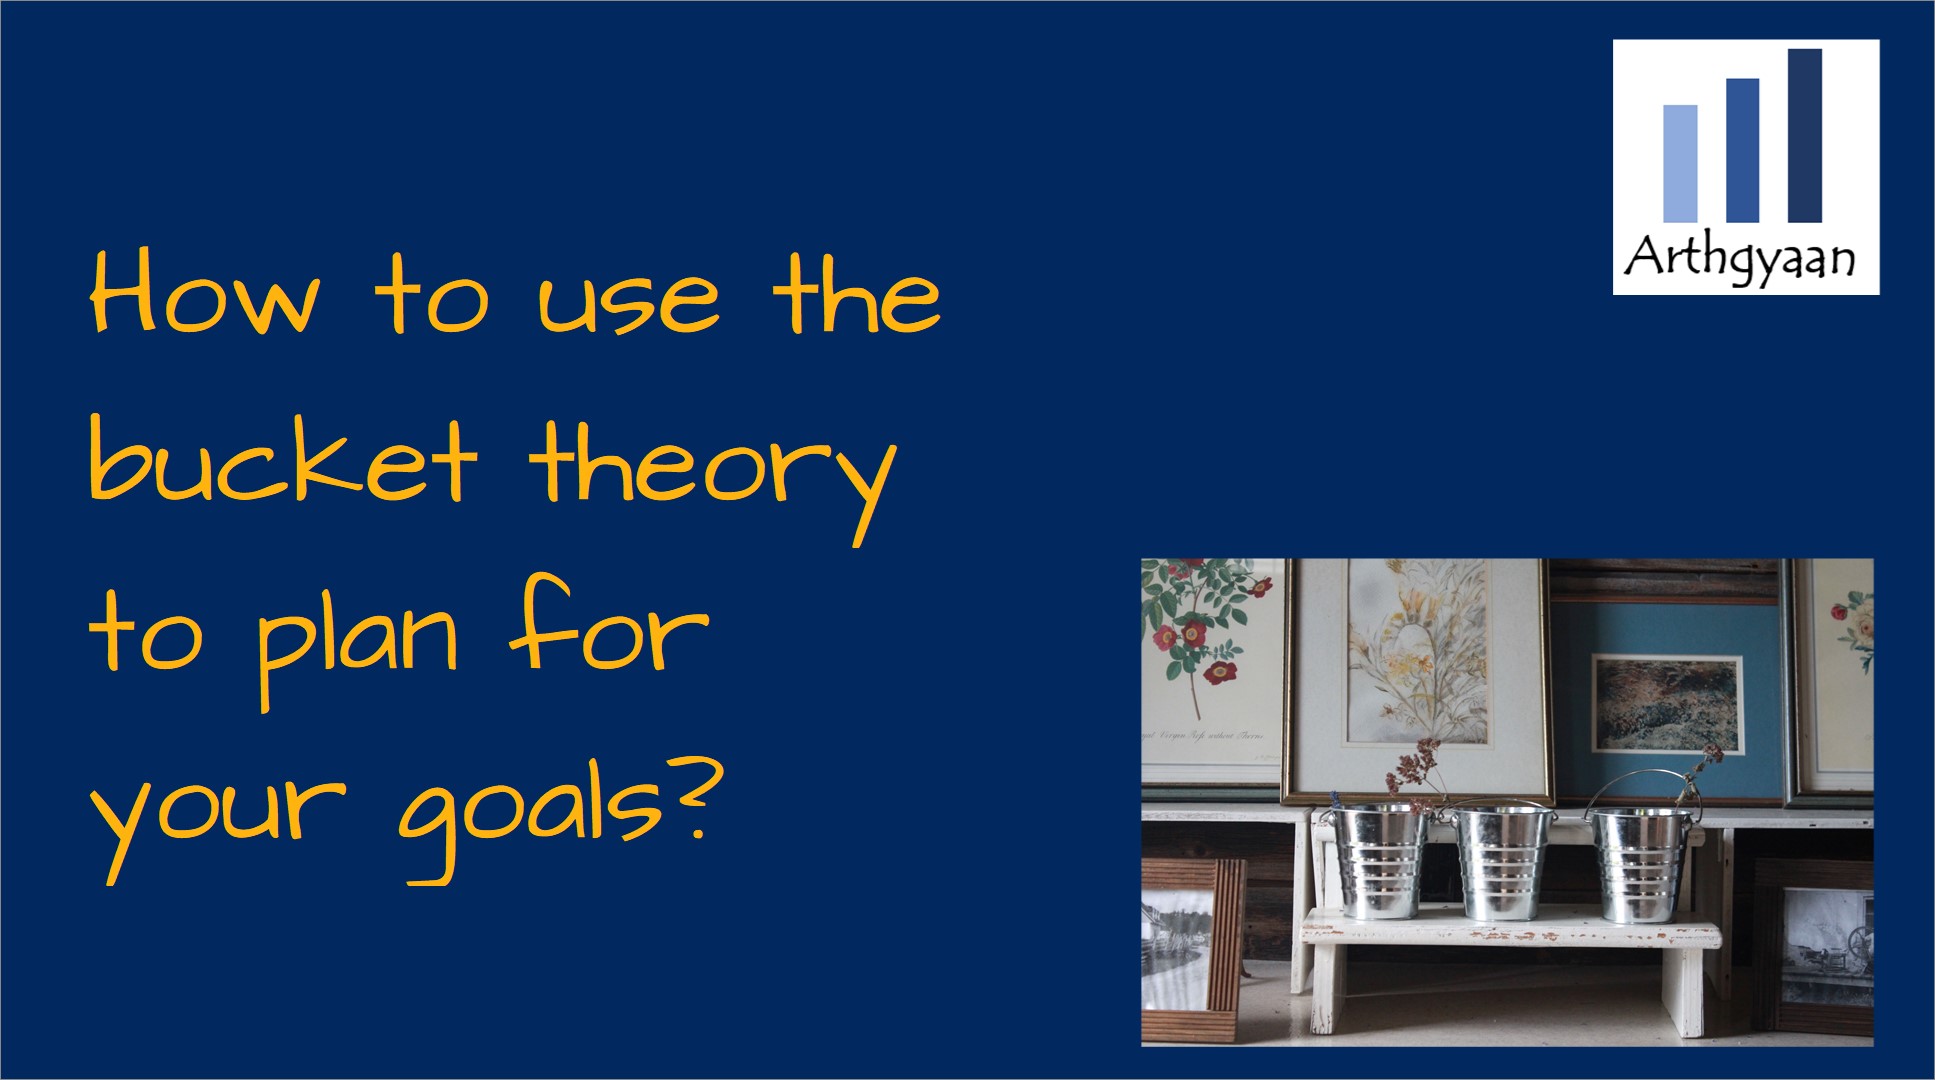 How to use the bucket theory to plan for your goals?